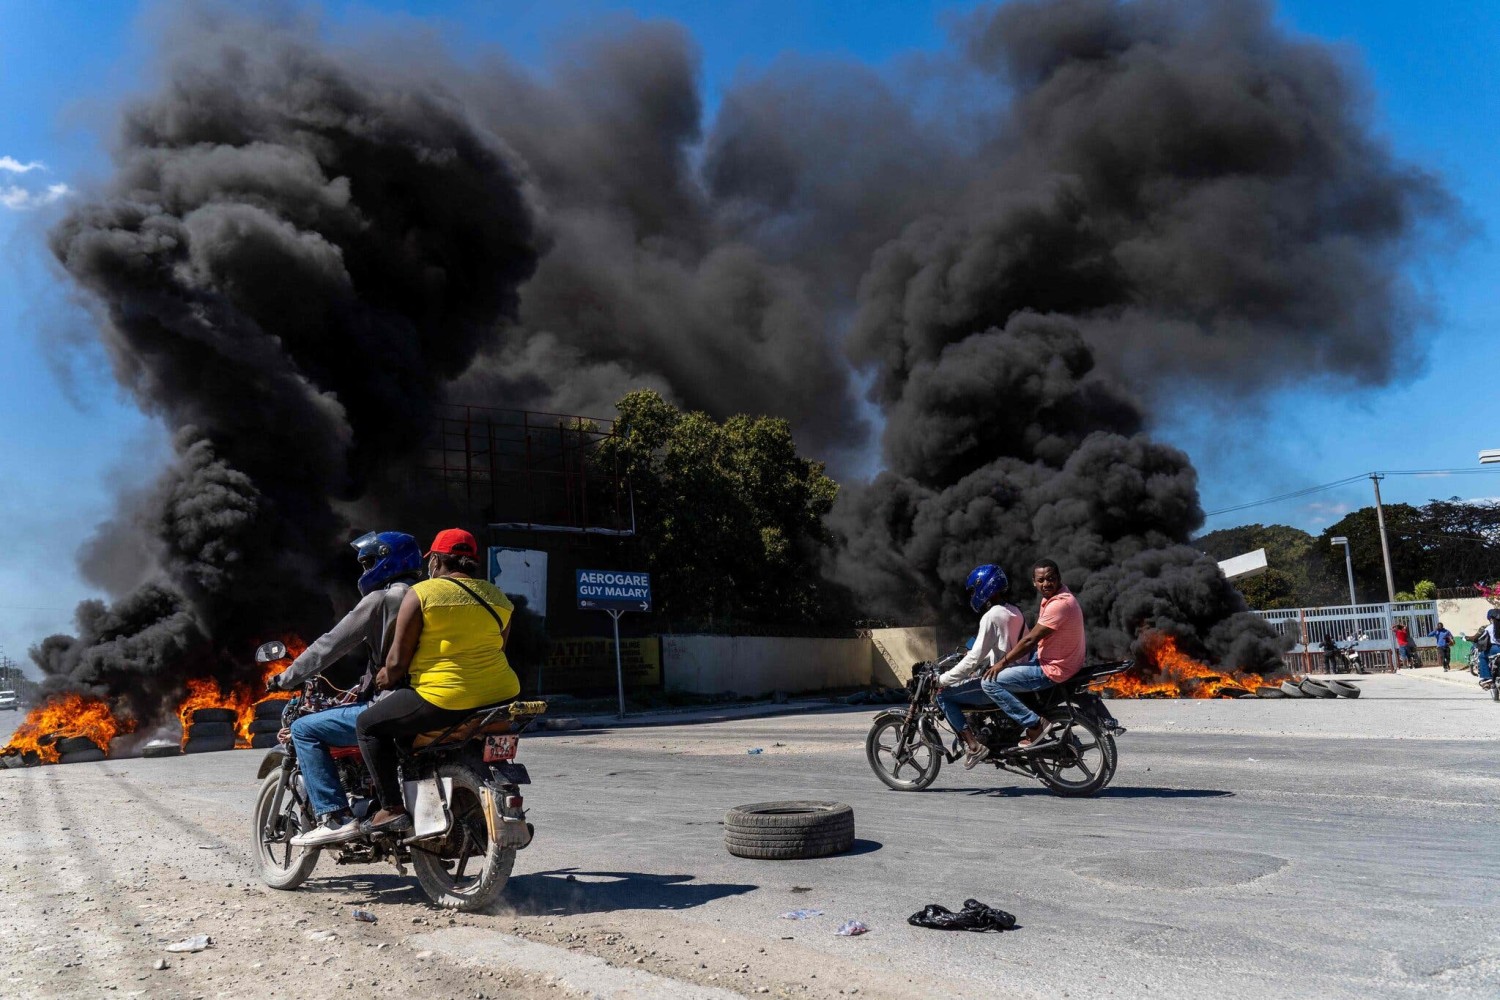 Tires were set on fire by the police during a protest in January in Port-au-Prince after a gang attack on a police station that left six officers dead.Credit...Richard Pierrin/Agence France-Presse — Getty Images